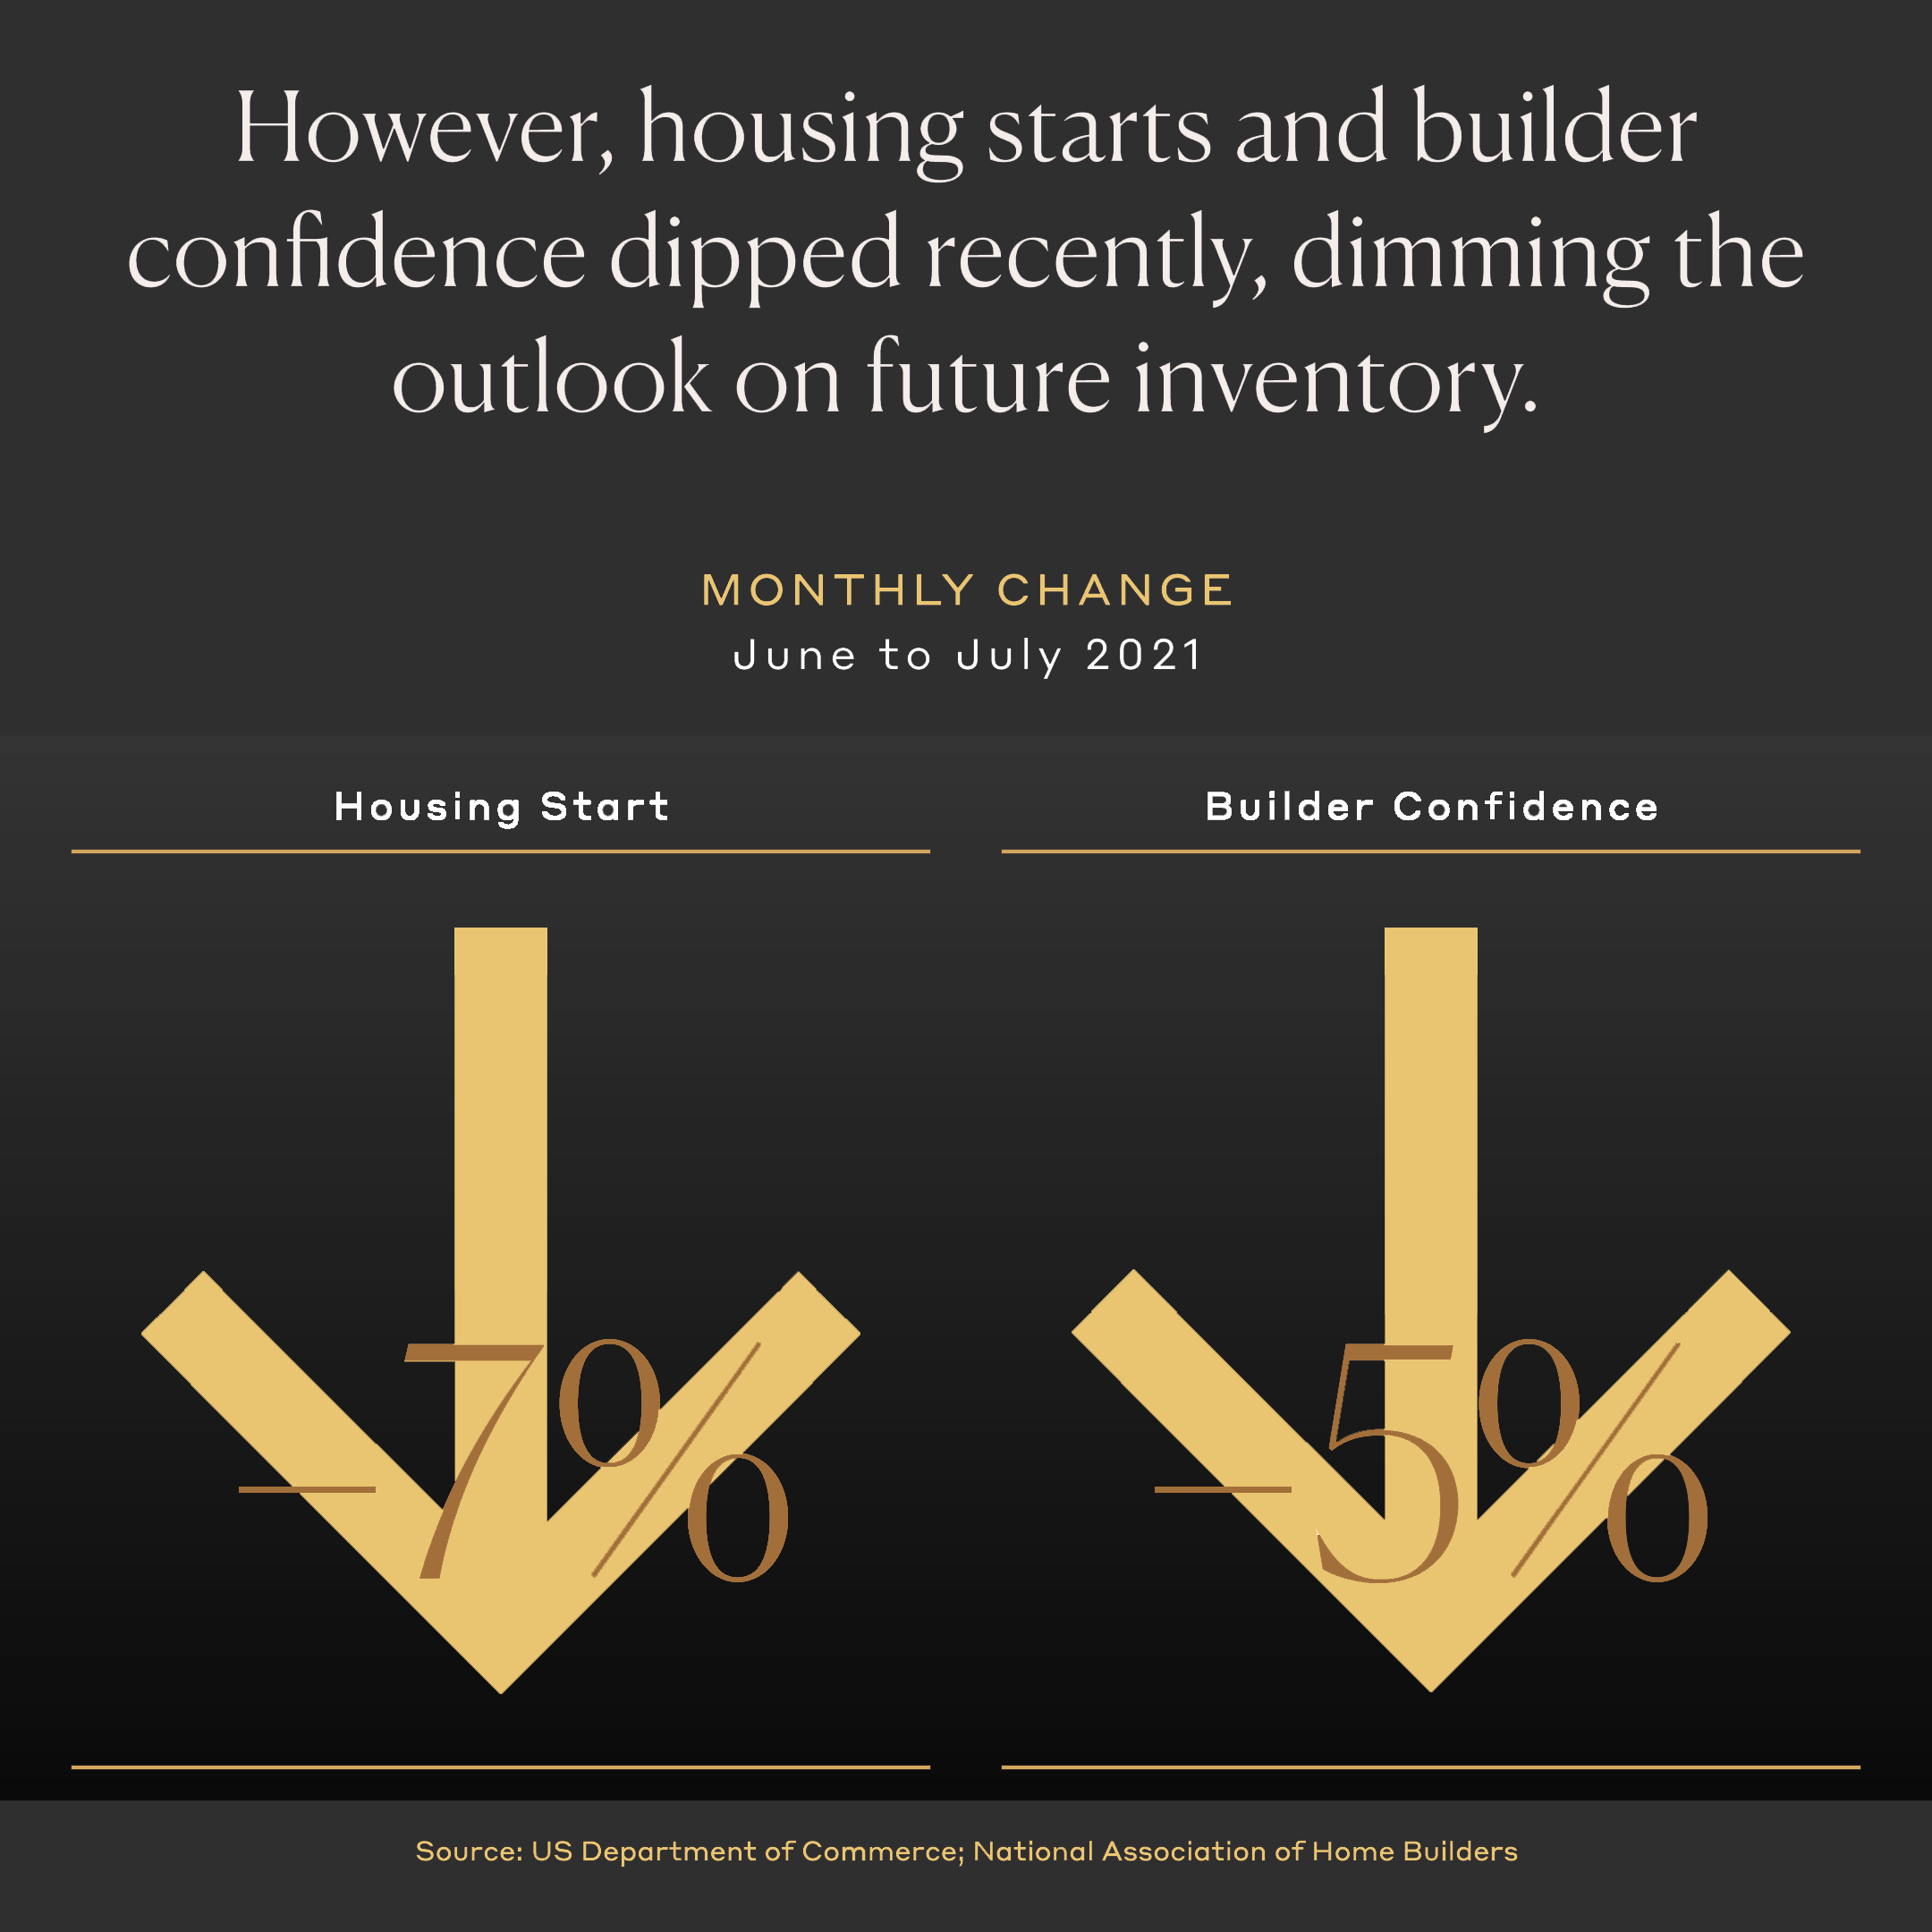 However, housing starts and builder confidence dipped recently, dimming the outlook on future inventory.